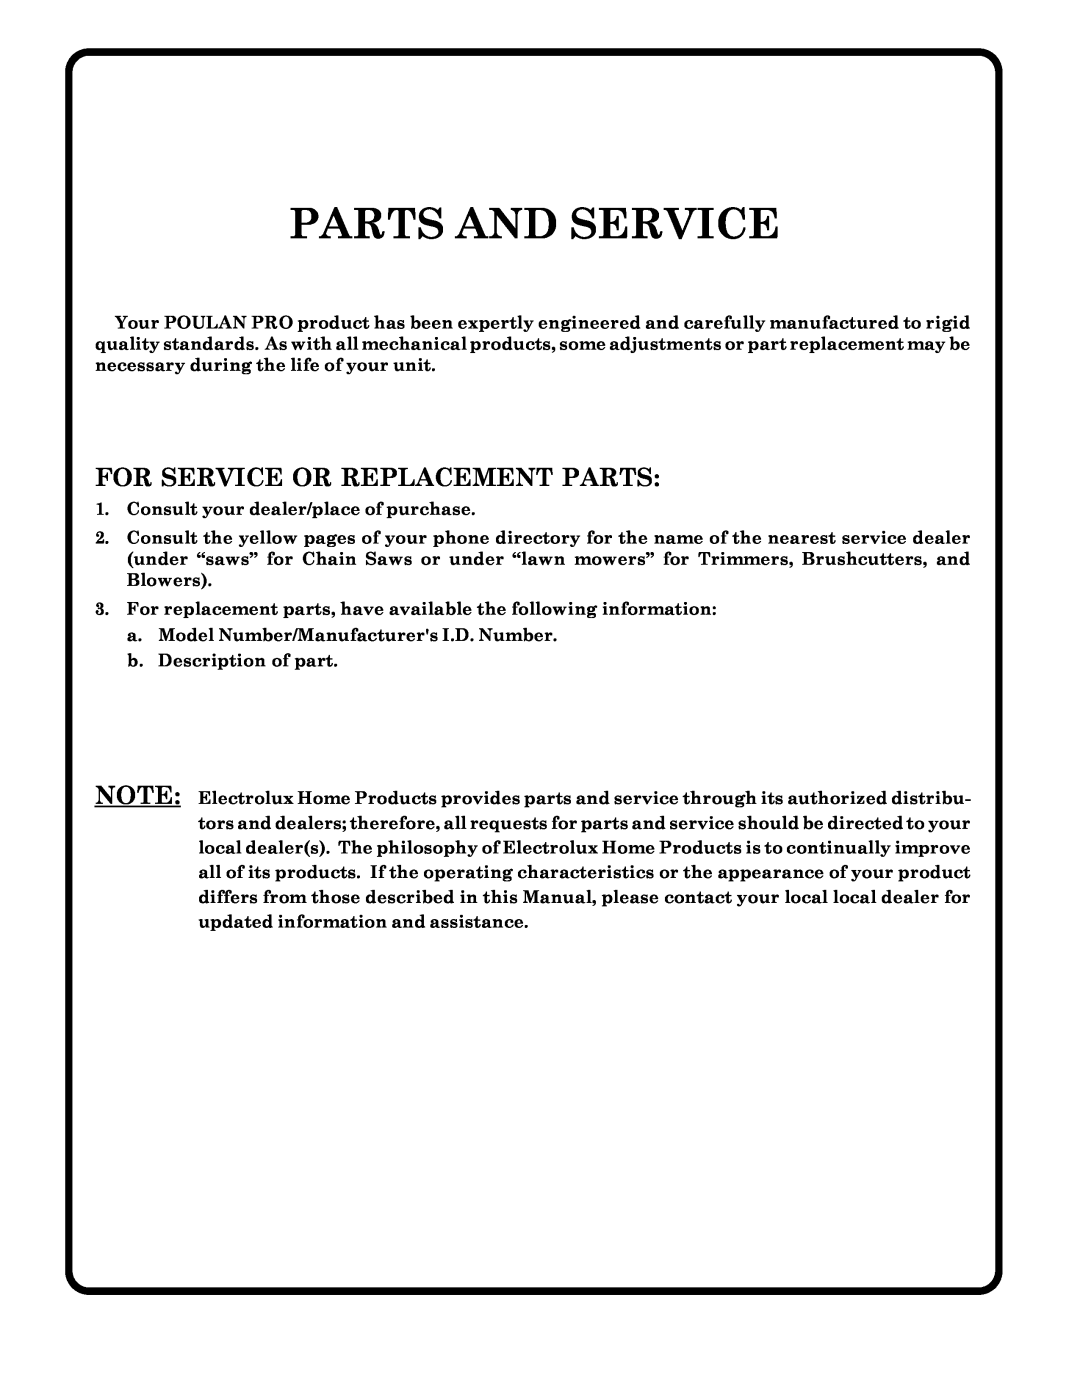 Poulan 180002 owner manual Parts And Service, For Service Or Replacement Parts 